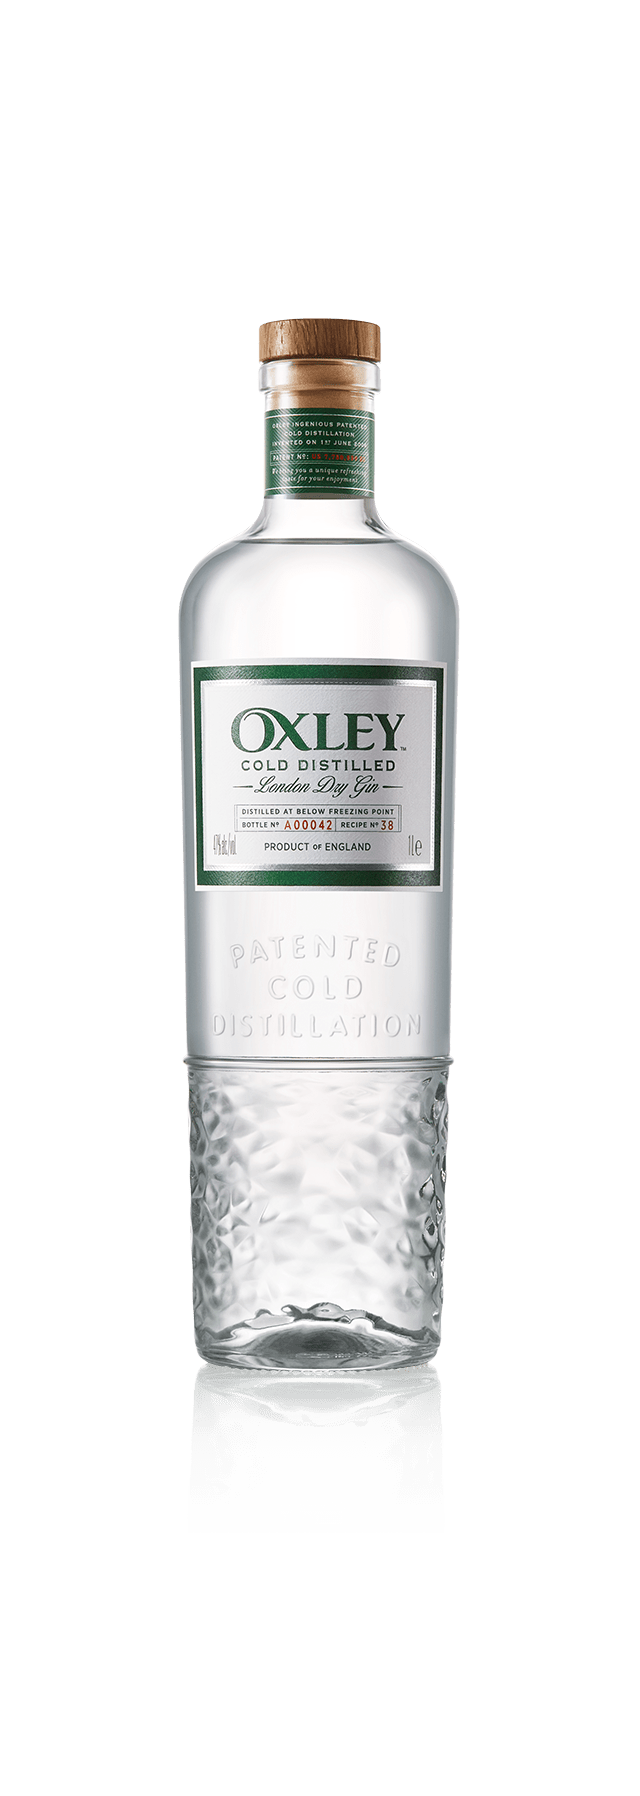 OXLEY LONDON DRY GIN COLD DISTILLED - Bk Wine Depot Corp